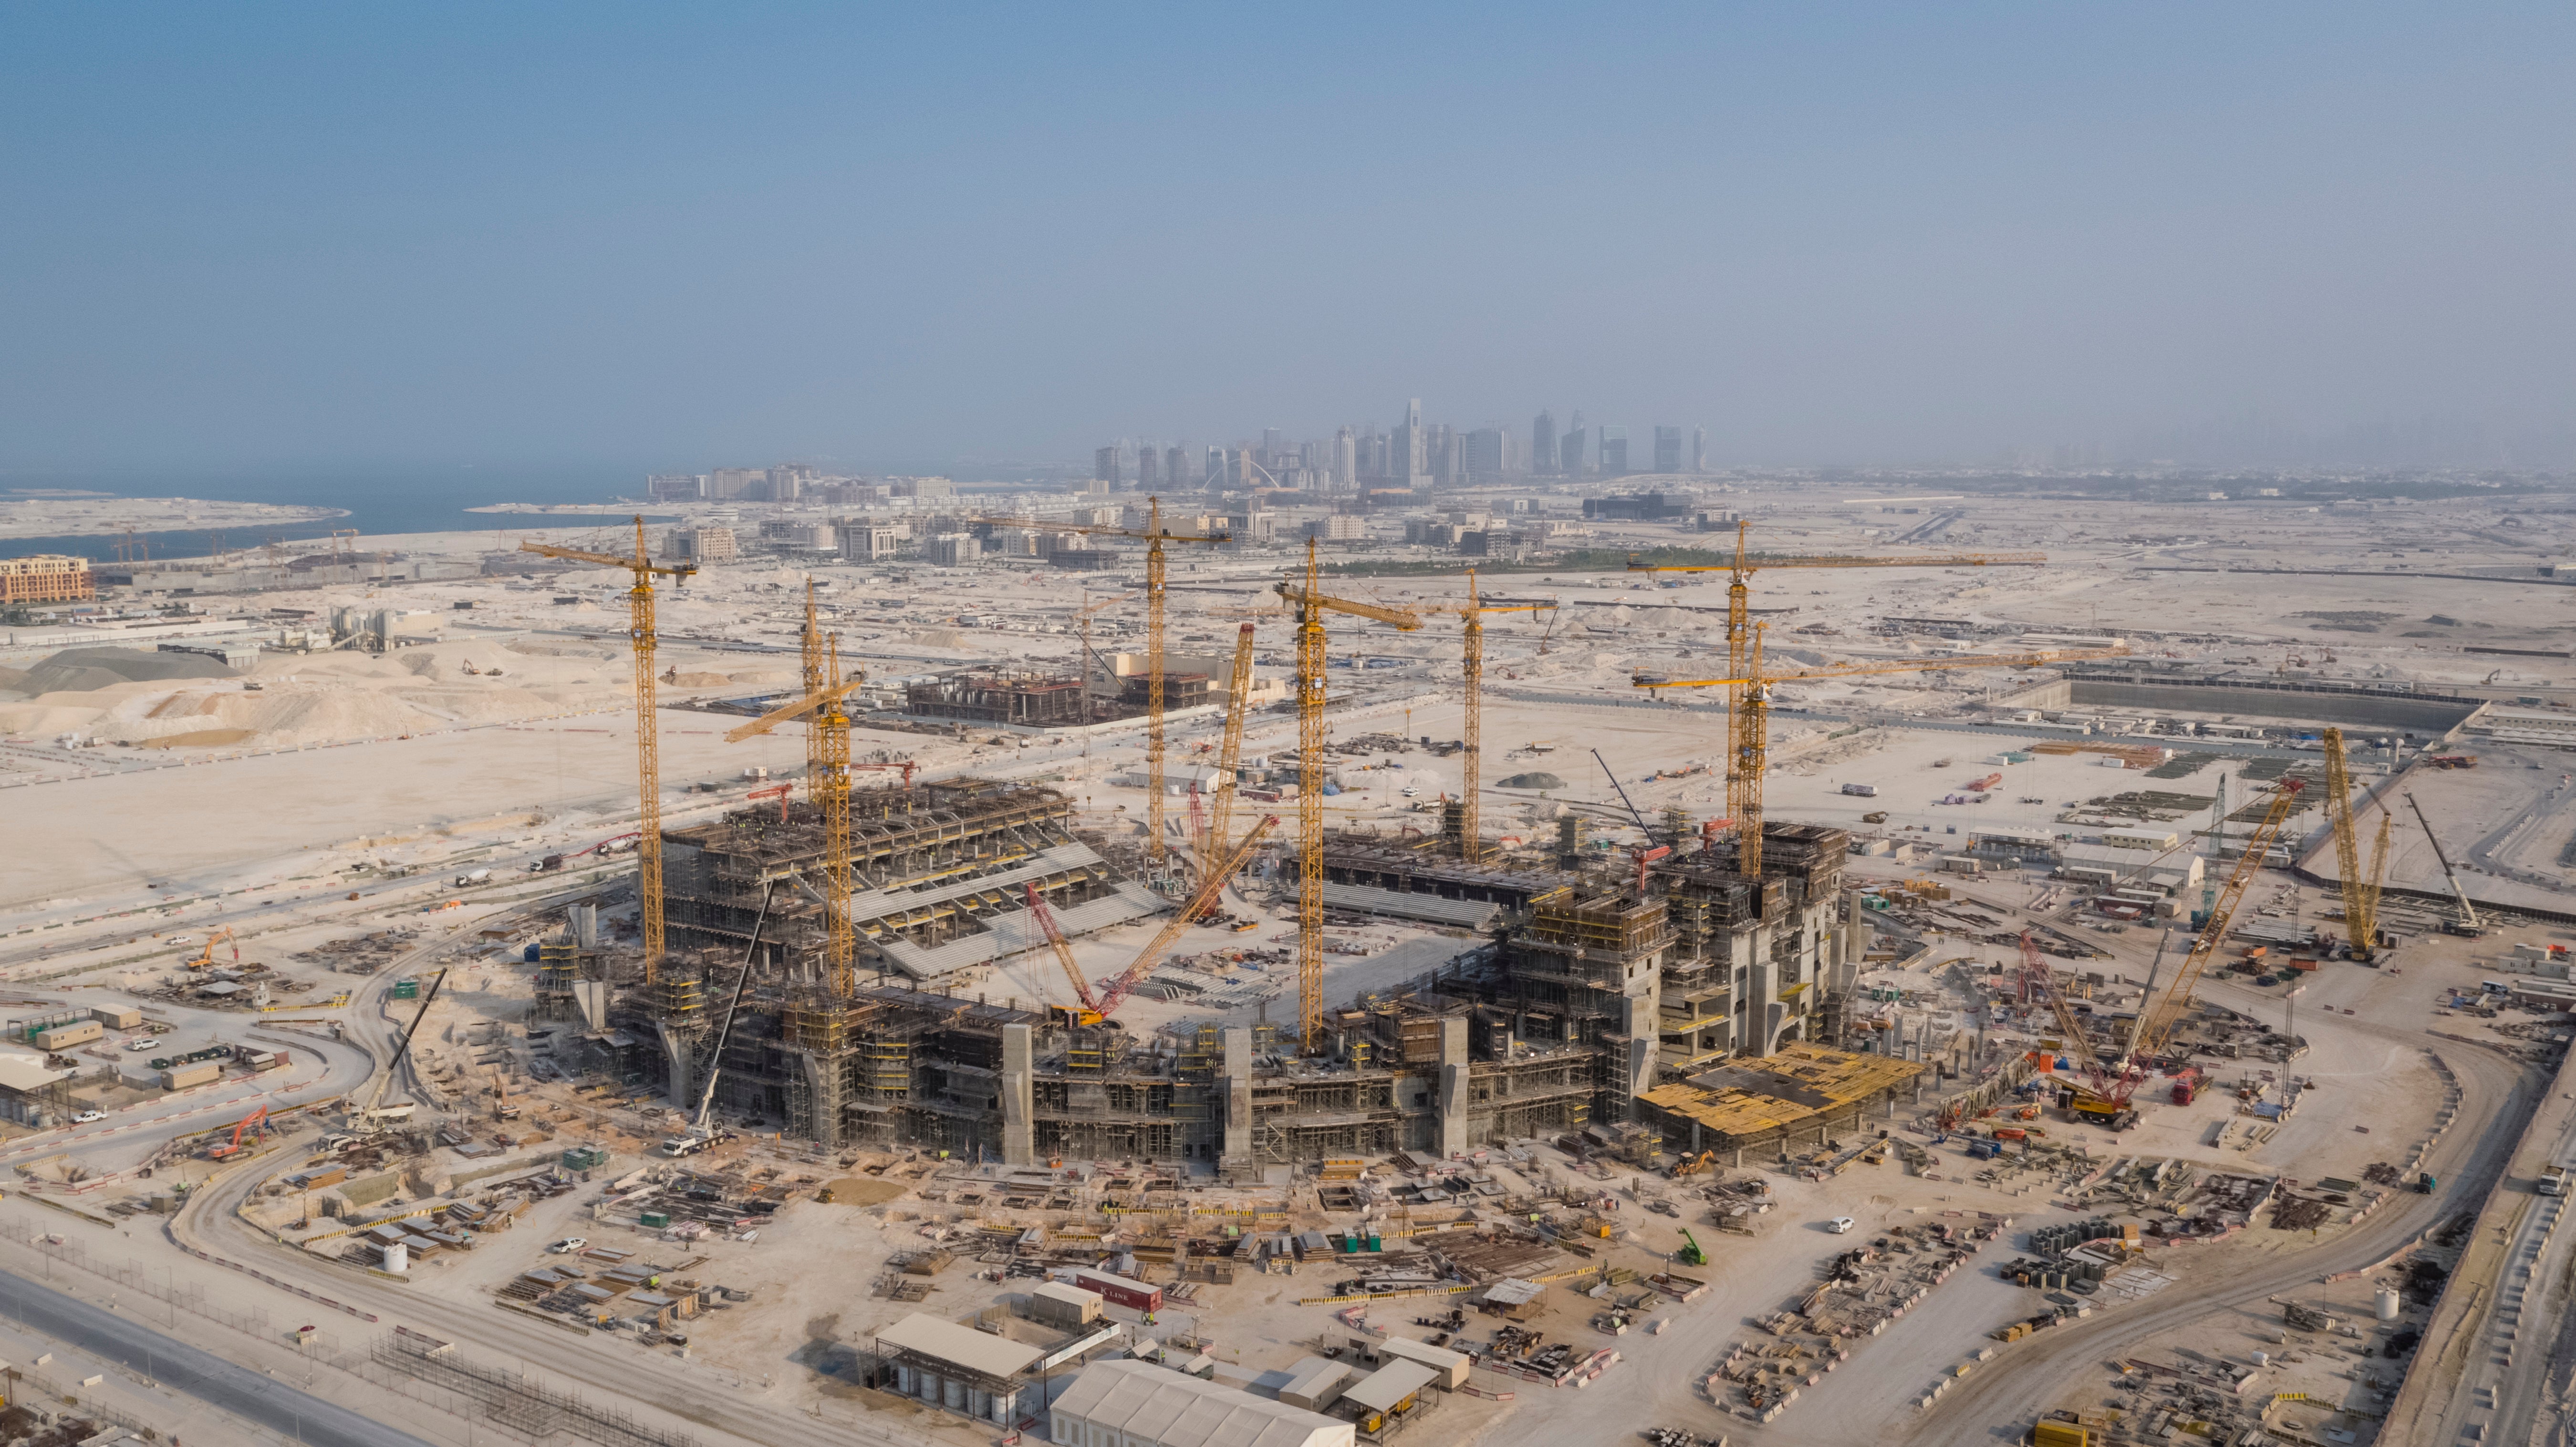 The Lusail Stadium under construction ahead of the 2022 World Cup